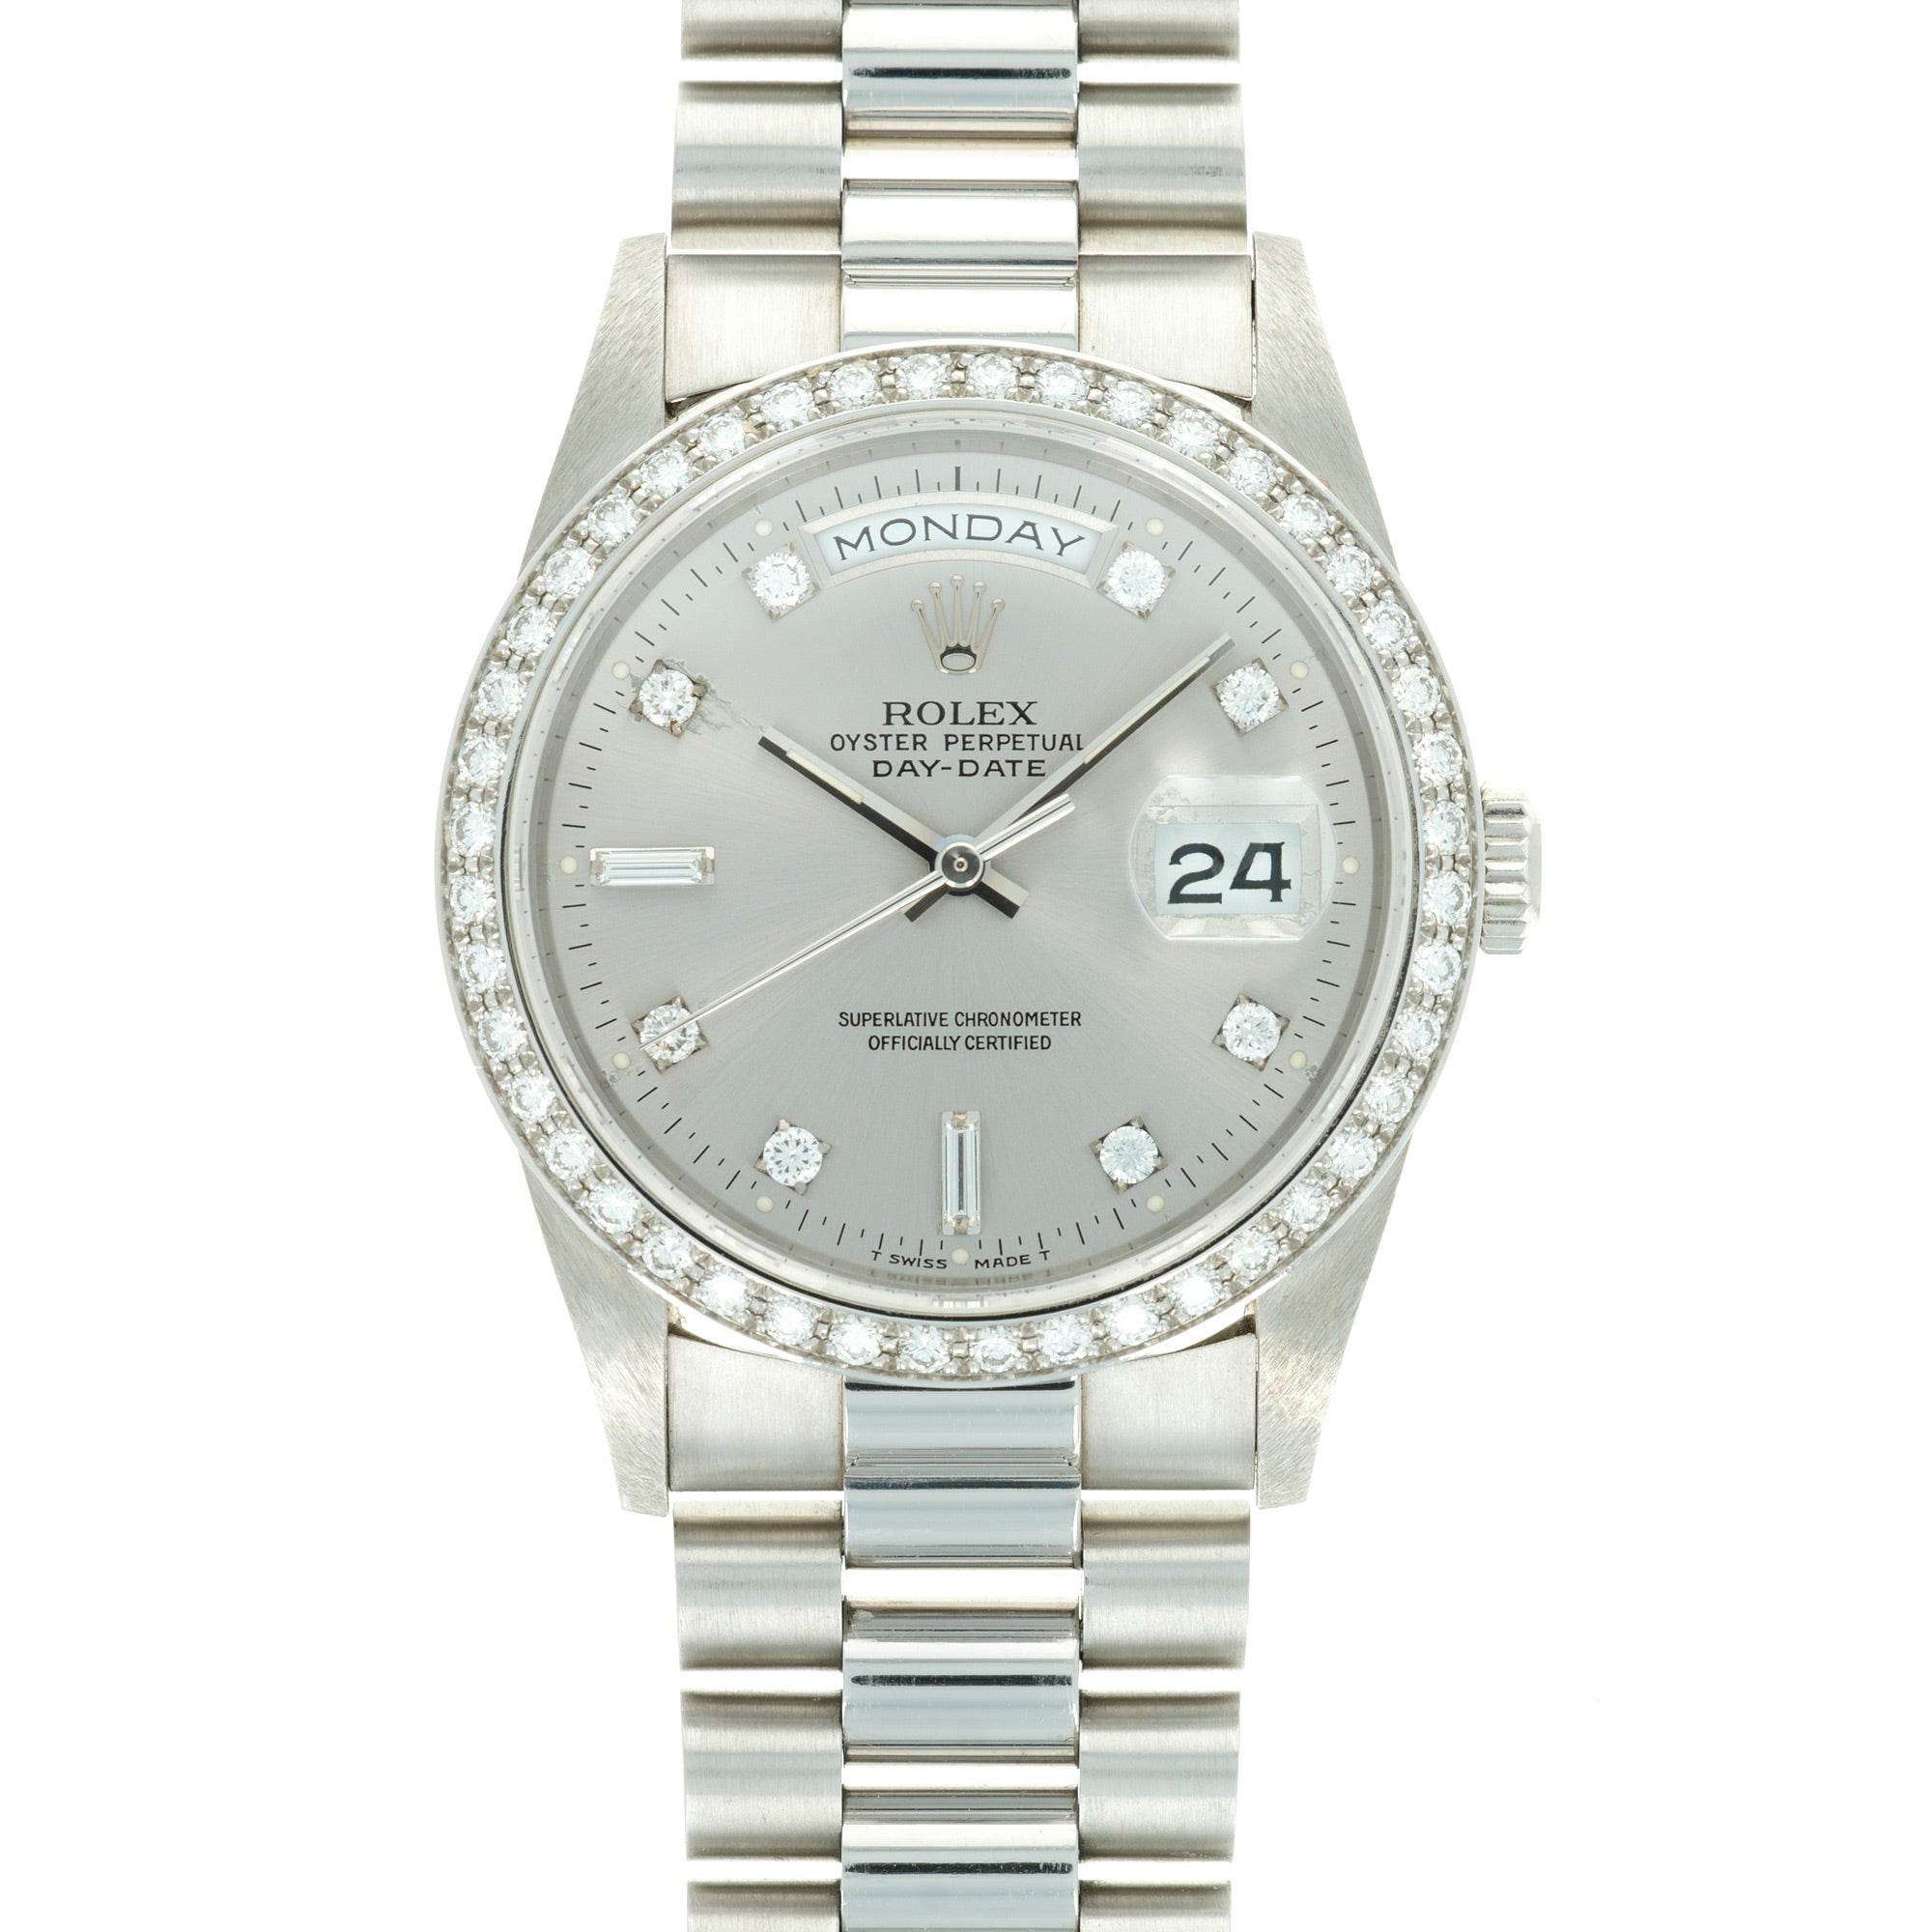 Rolex - Rolex Platinum Day-Date Ref. 18346 with Diamond Bezel and Dial - The Keystone Watches